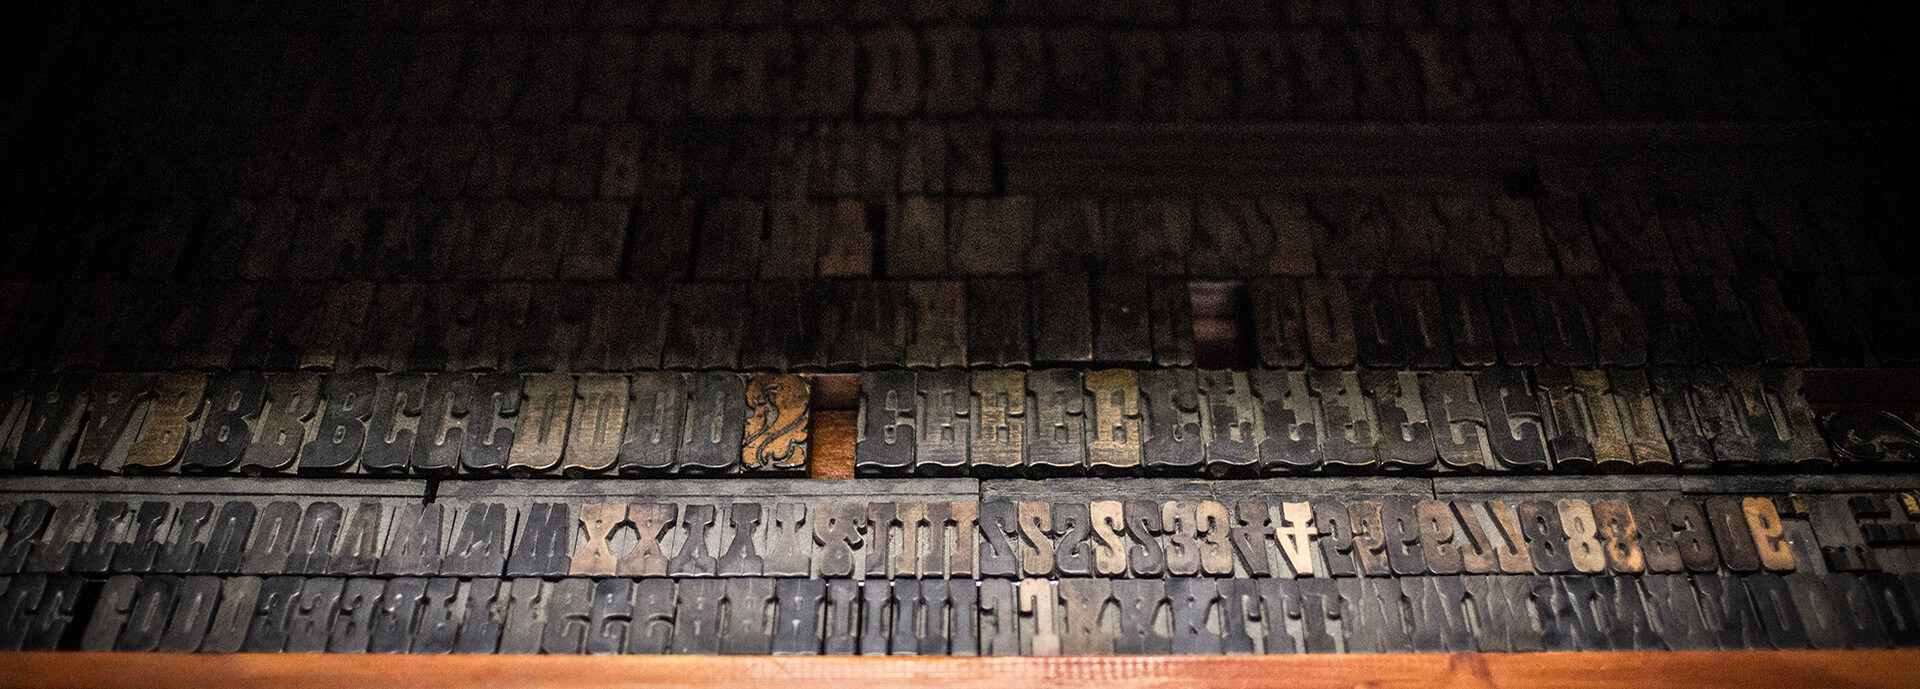 Pathfoot printing press letters